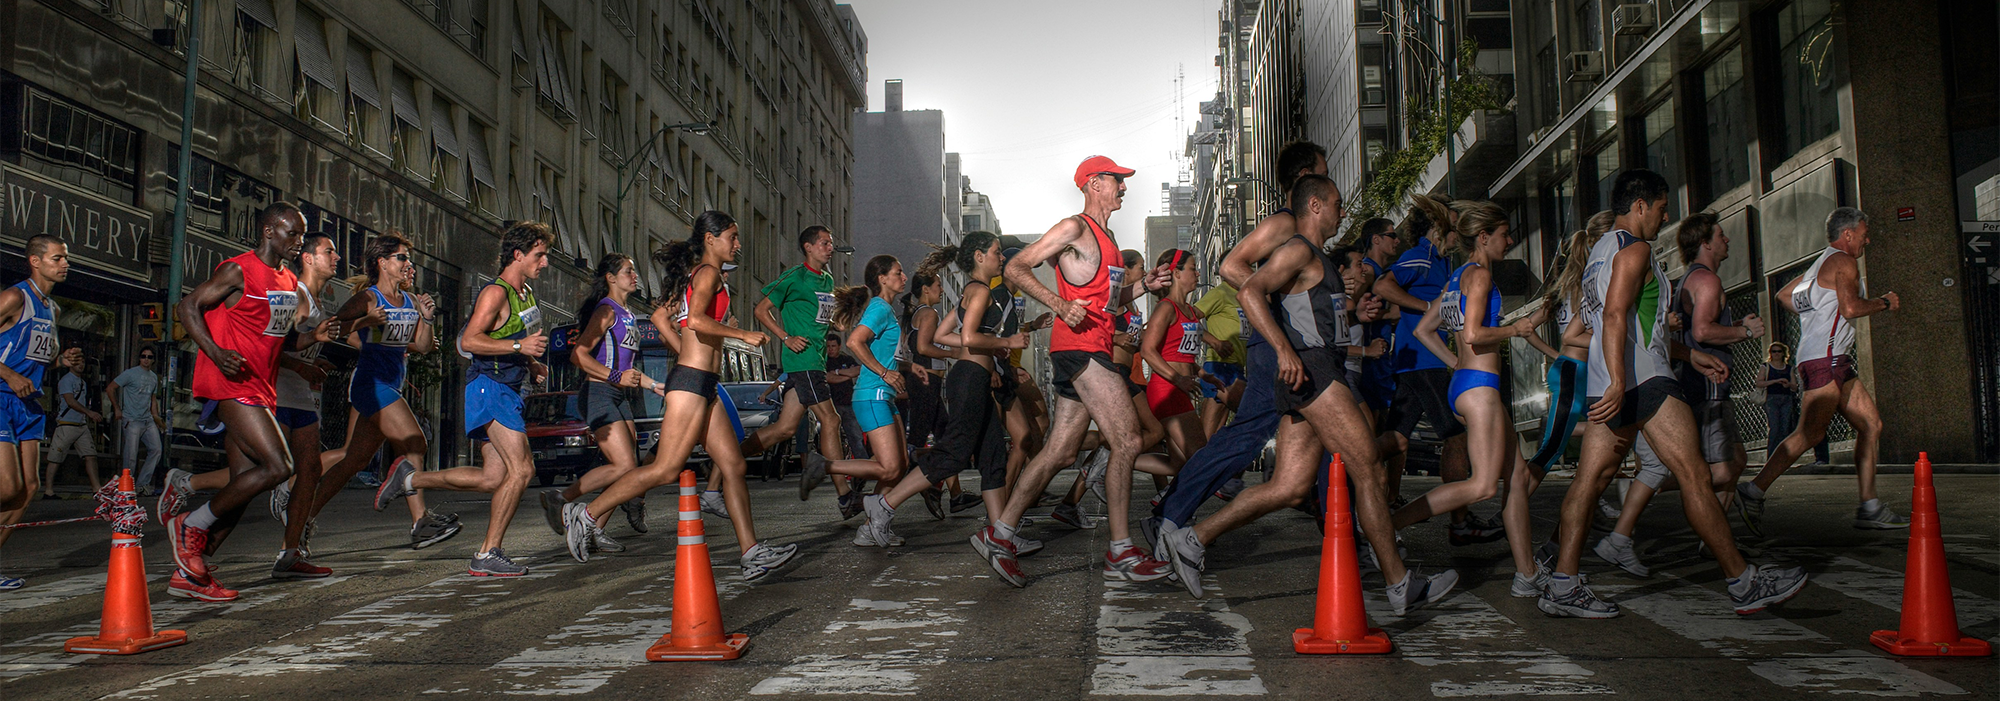 A group of people participating in a February race in the city.